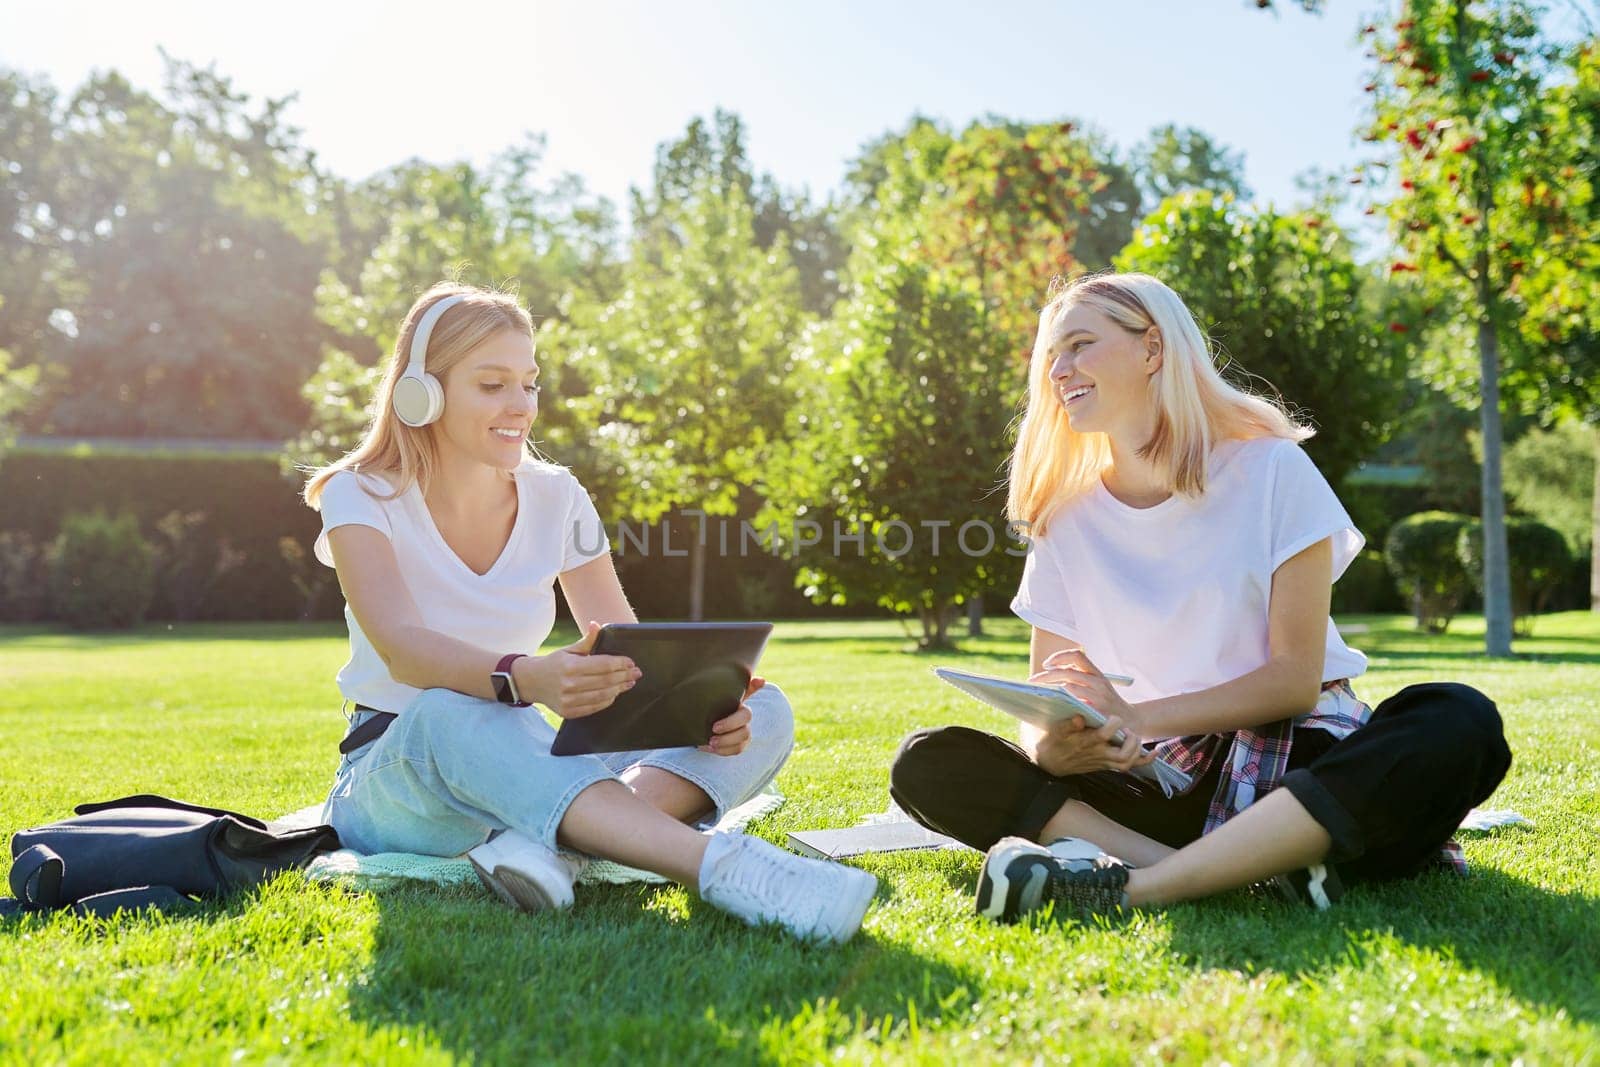 Girls teenage students sitting on green lawn in park with backpack, books, digital tablet, drink bottle of water. University, college, school, education and knowledge, adolescent lifestyle